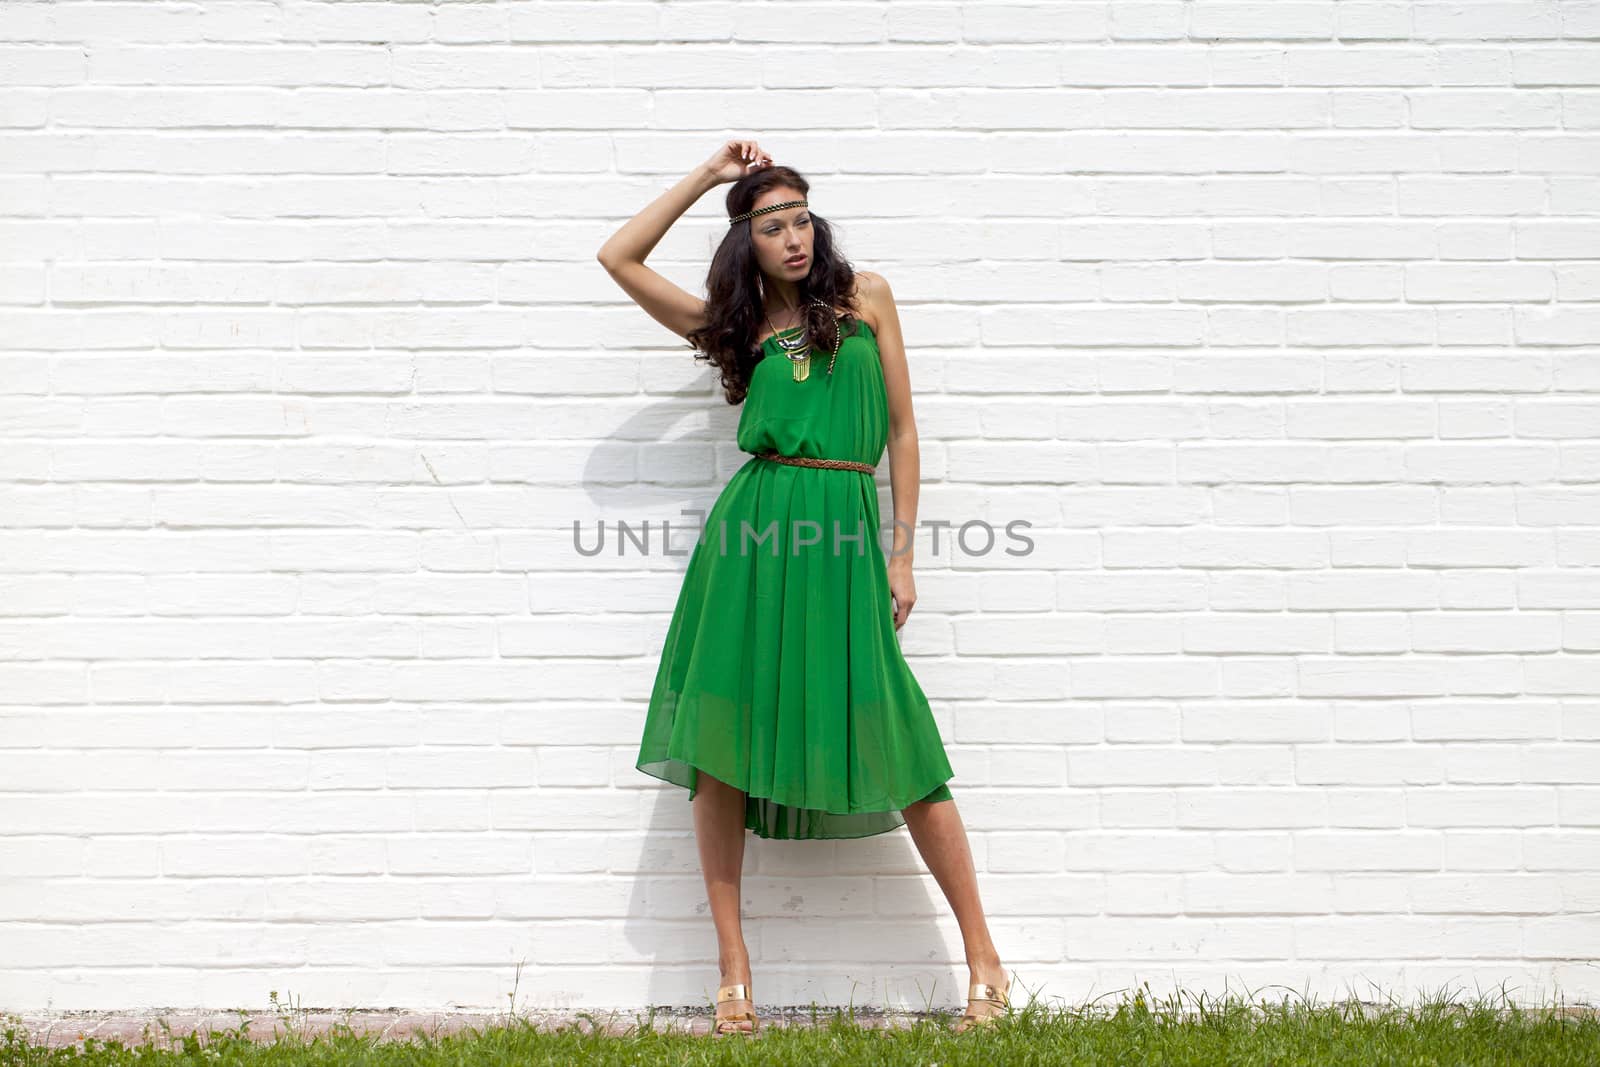 Beautiful young woman in green dress, against white wall